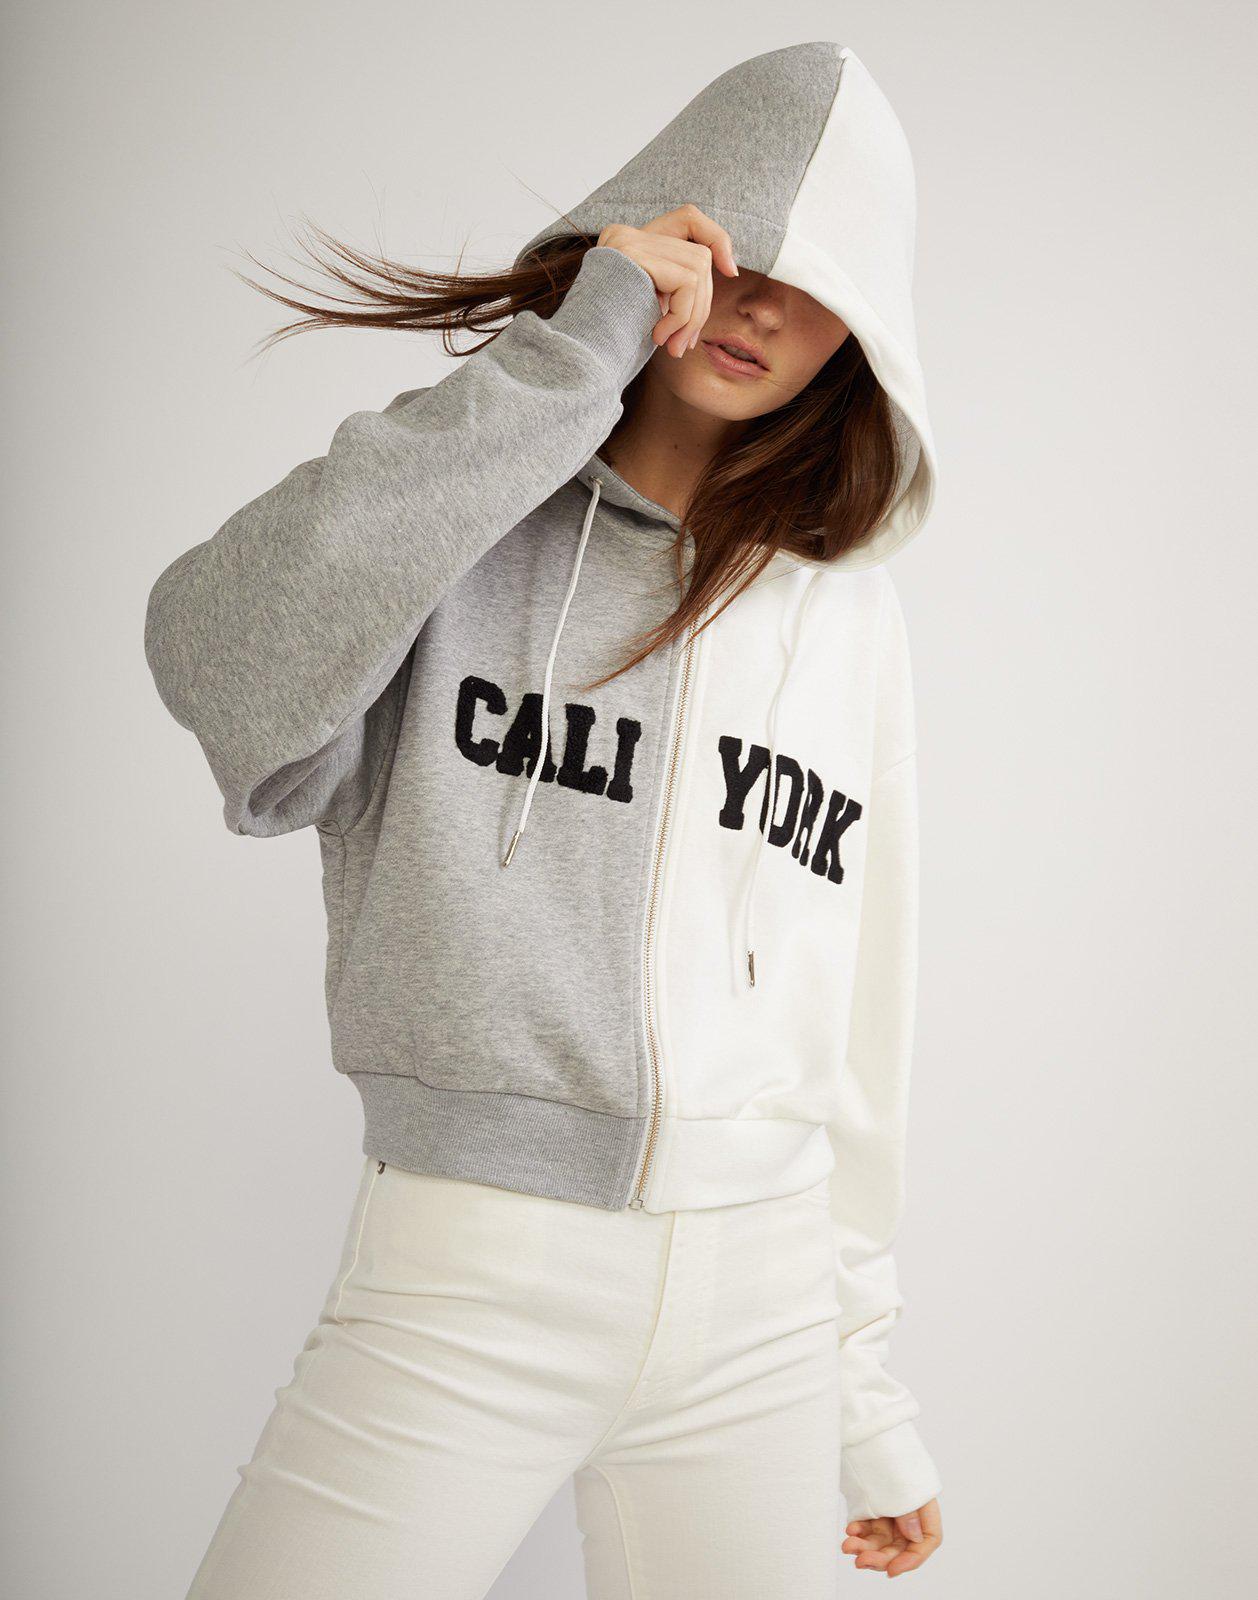 Cynthia Rowley Cotton Caliyork Cropped Zip Up Hoodie in White/Grey (Gray) -  Lyst